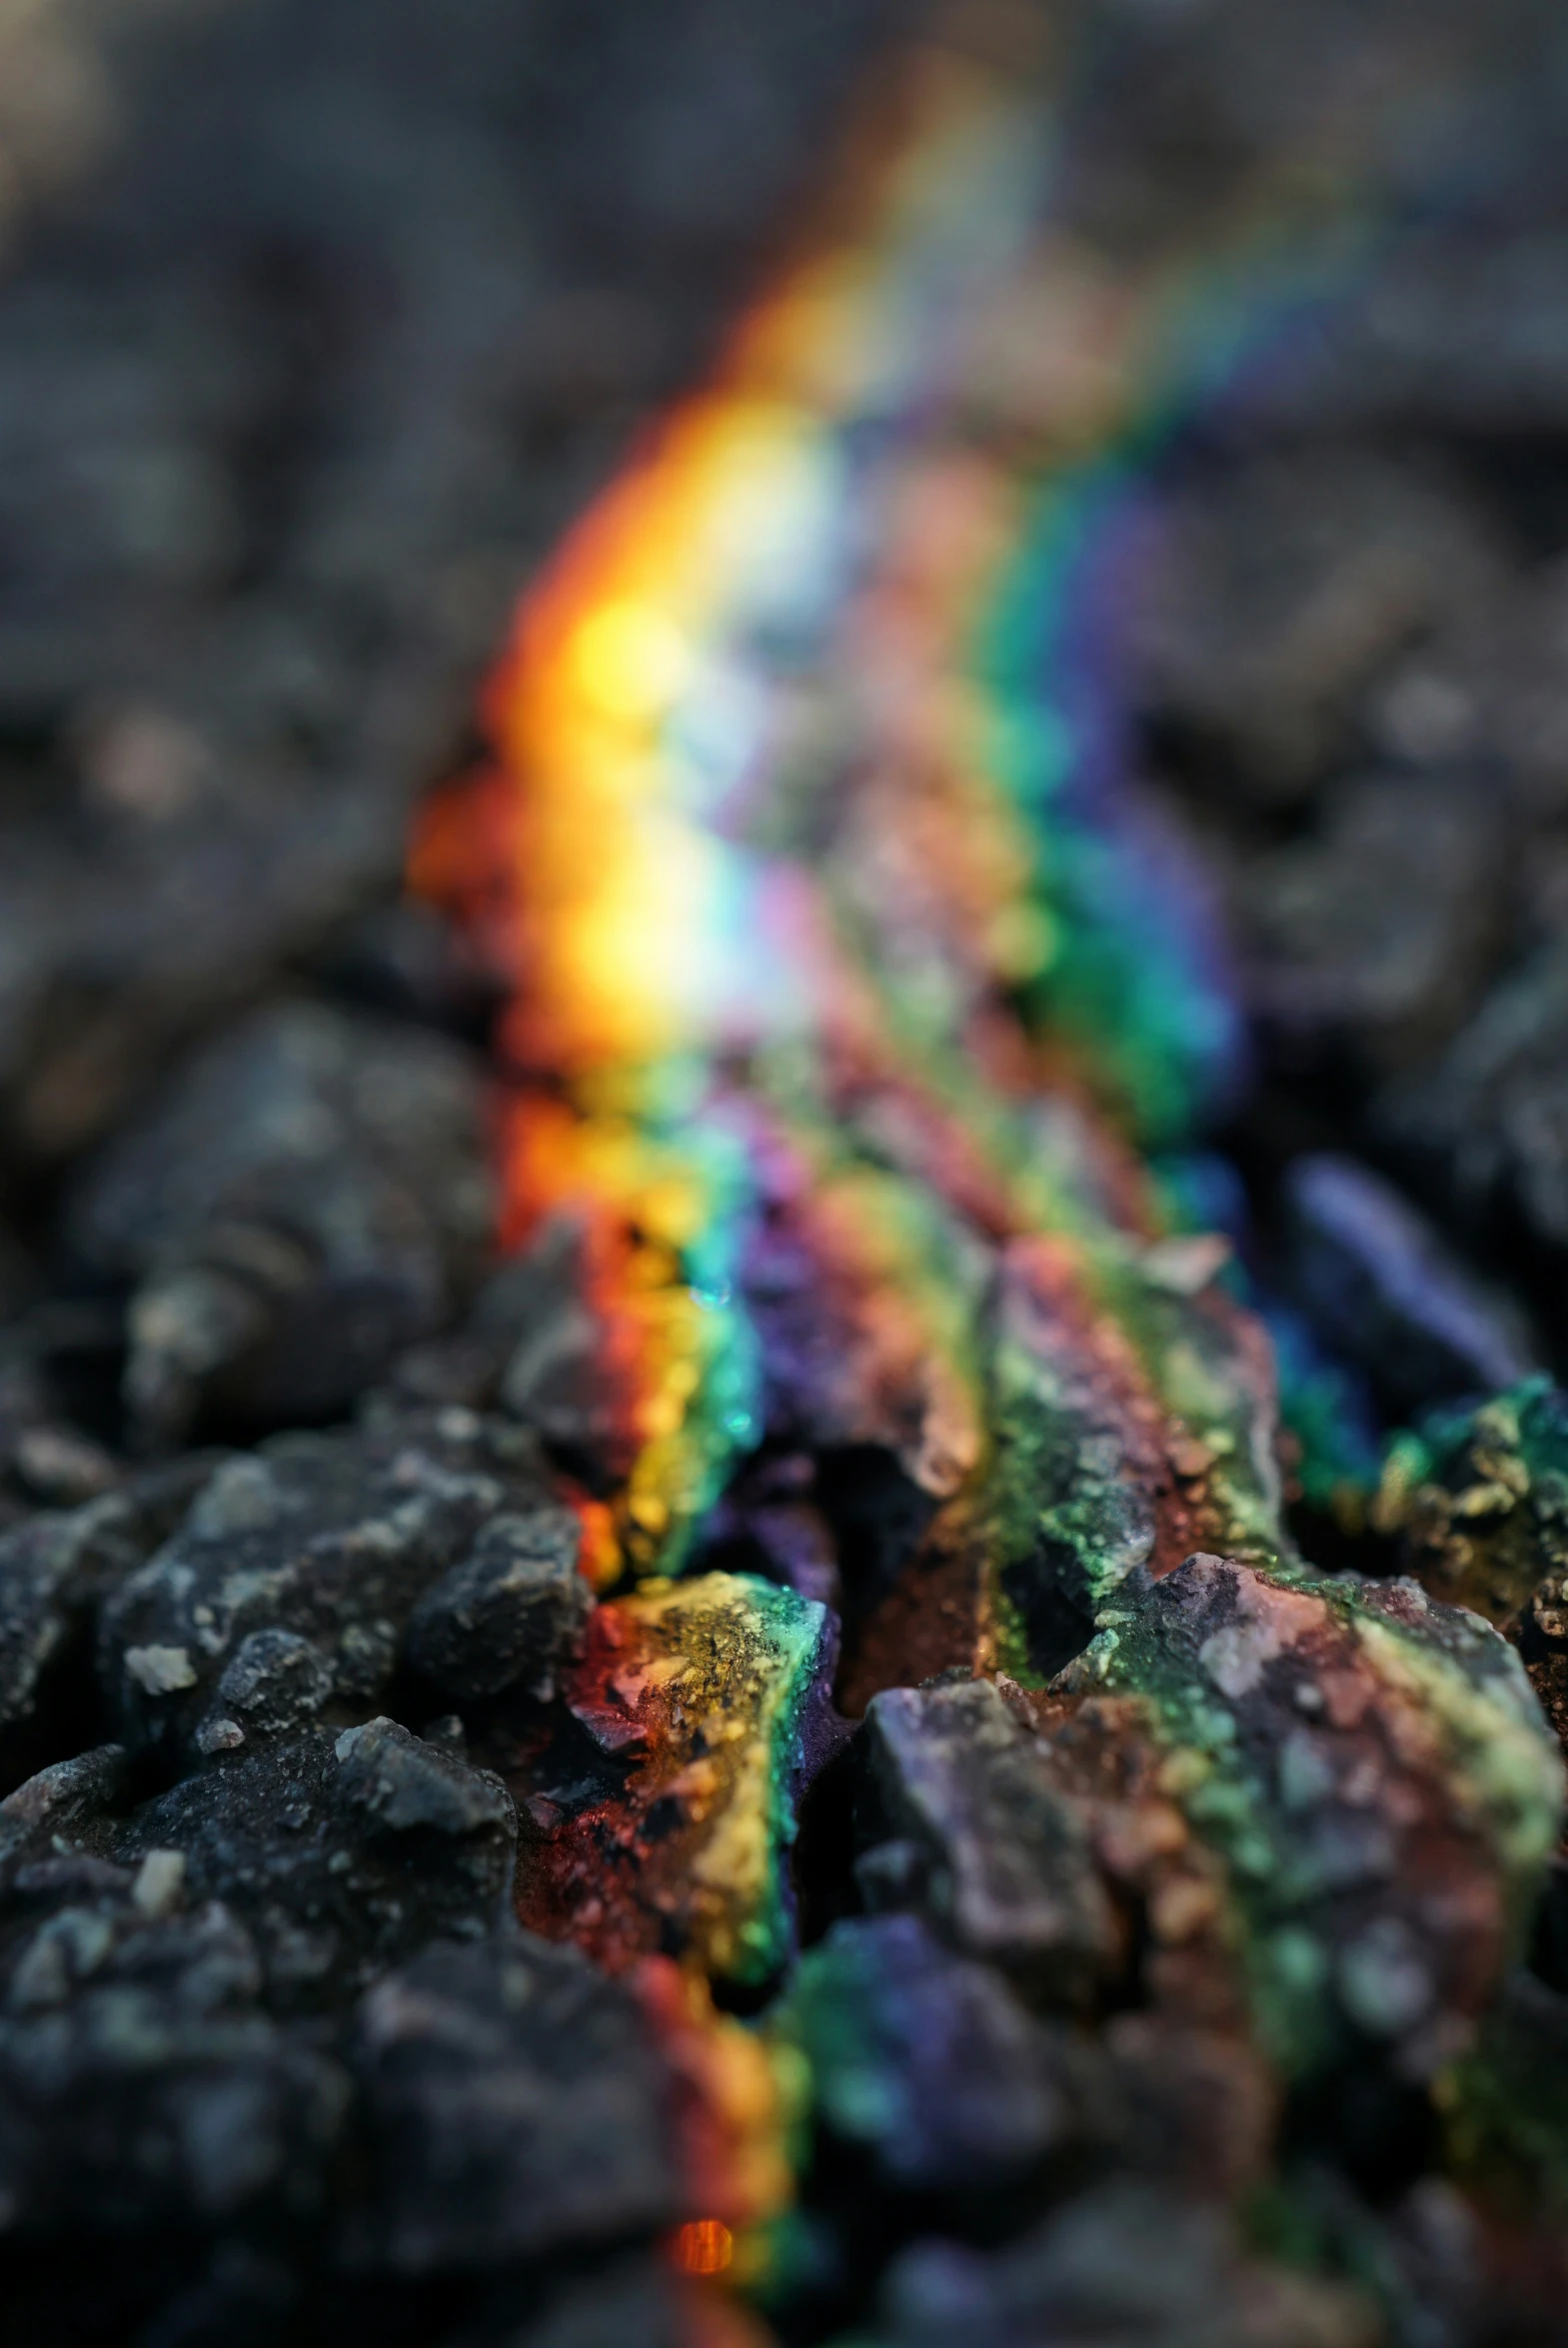 the small, rainbow colored substance appears to be made of asphalt